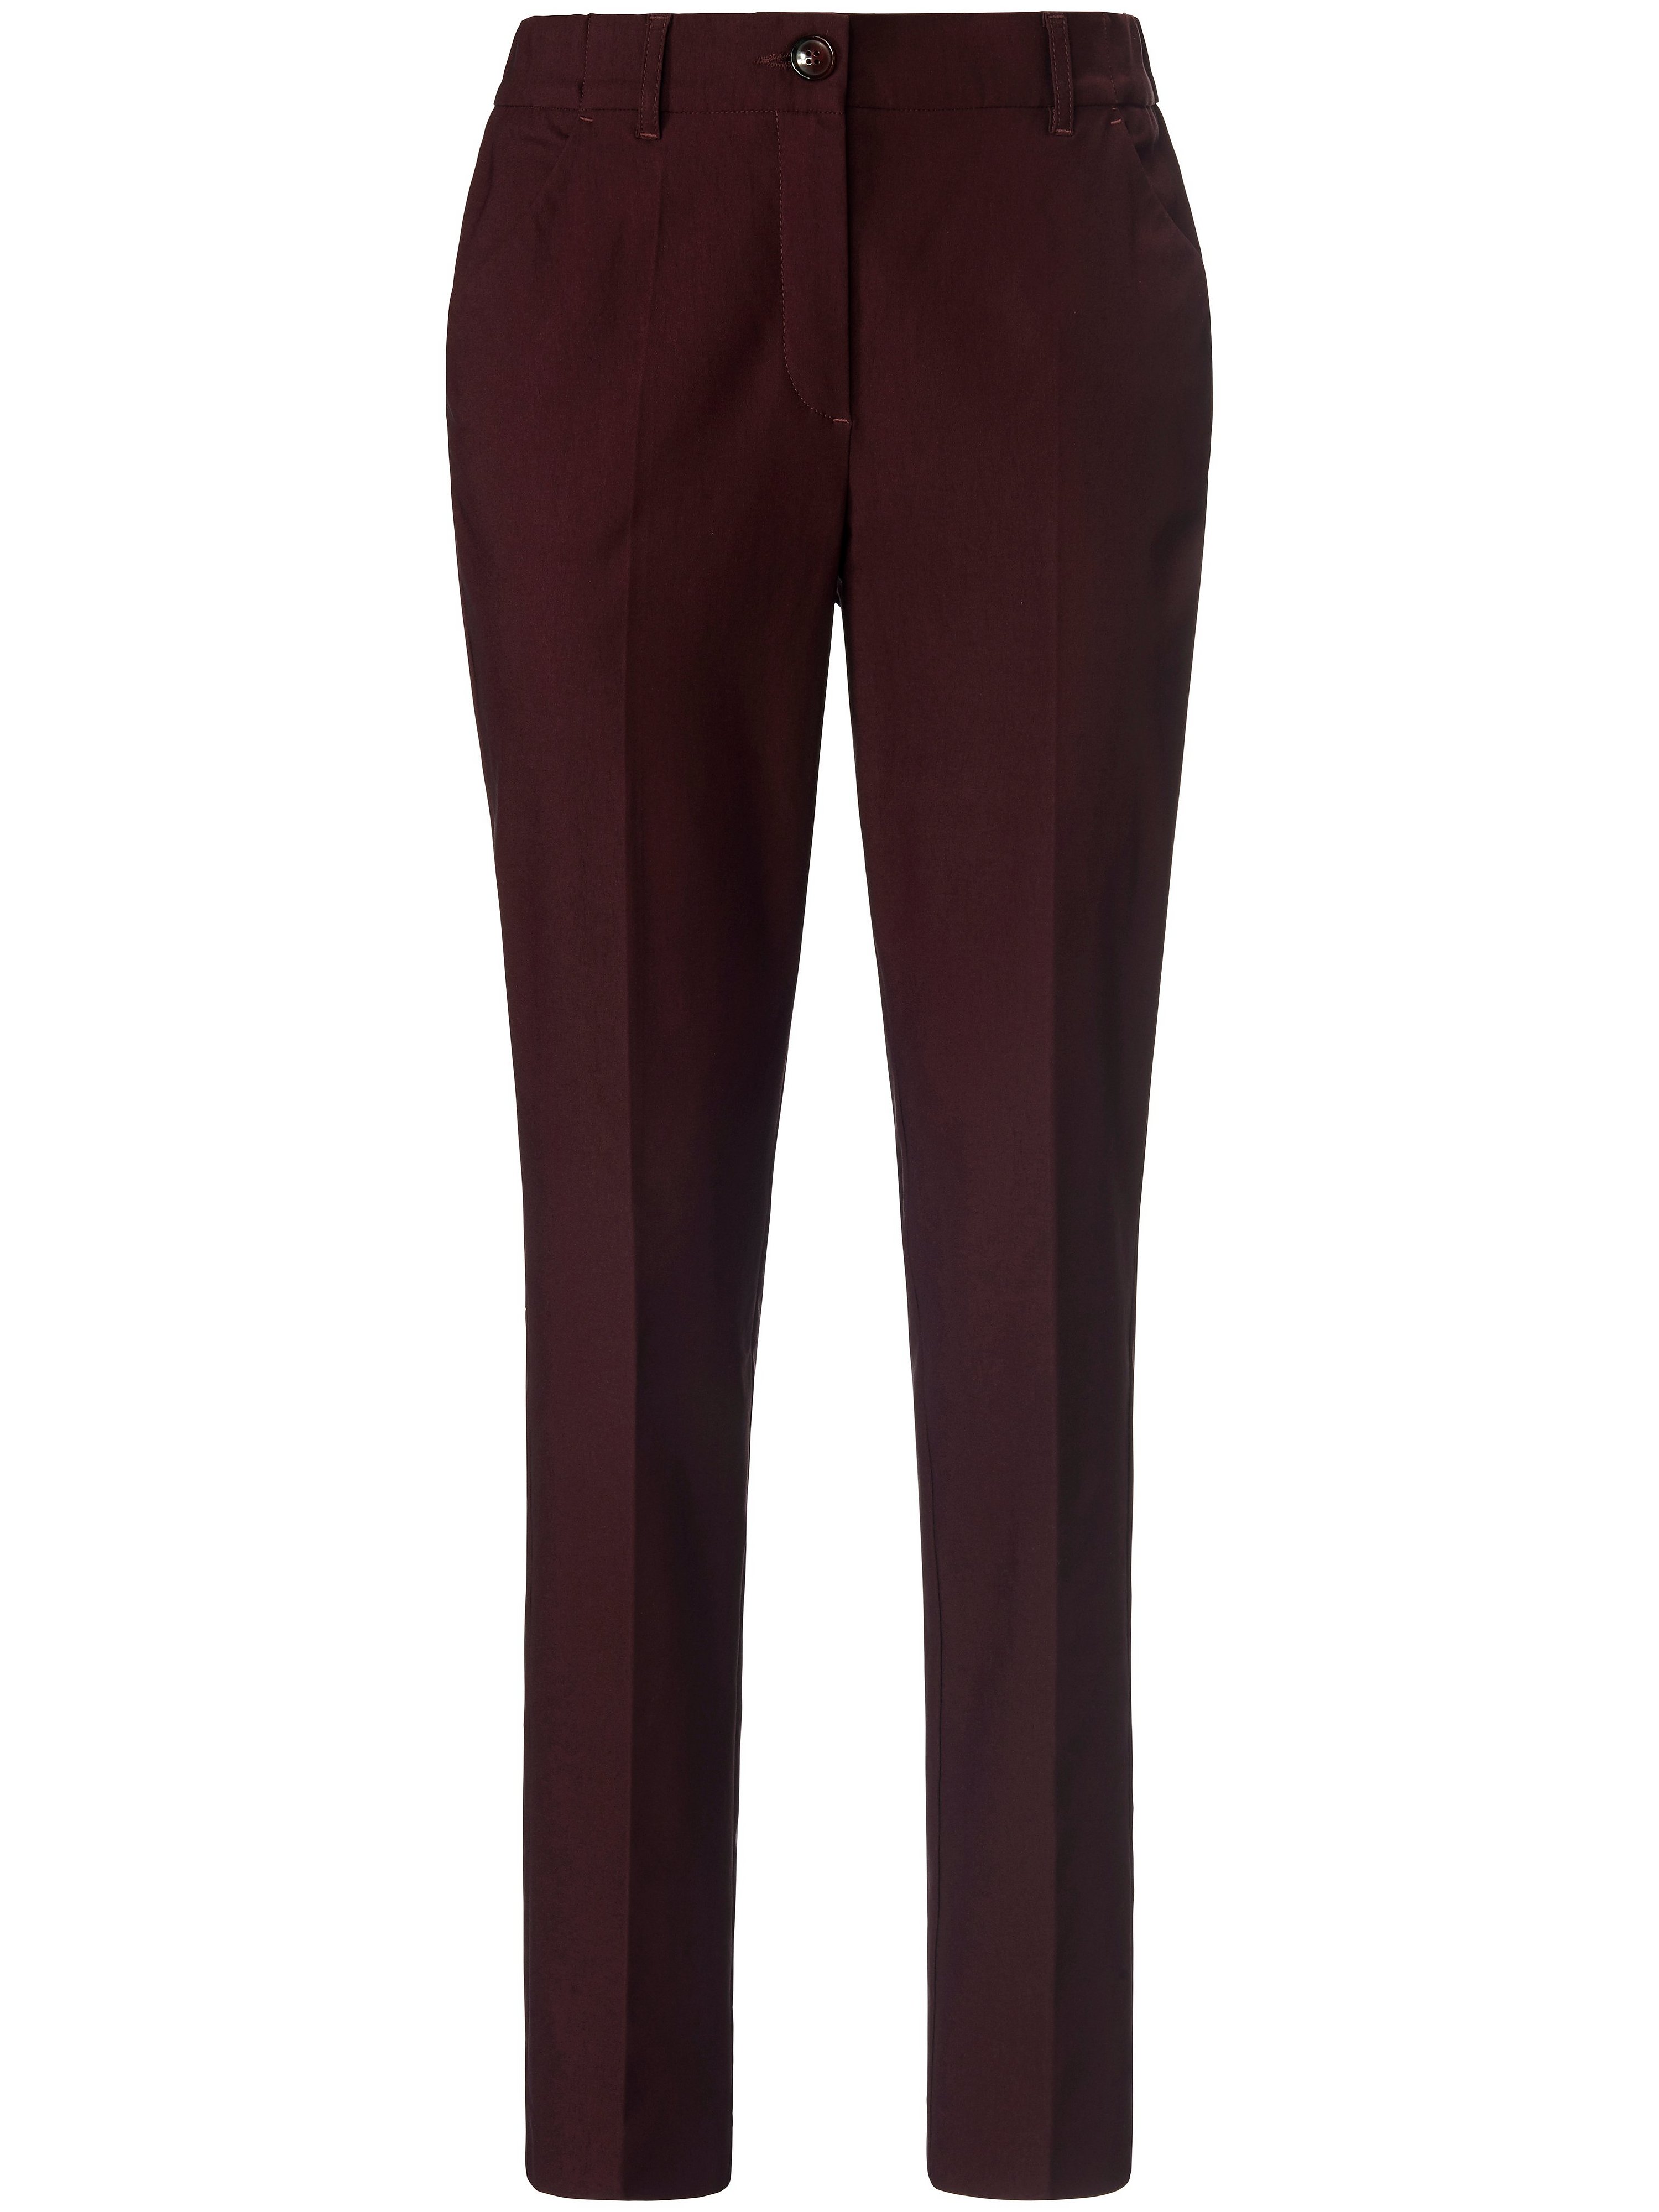 Le pantalon coupe Barbara  mayfair by Peter Hahn rouge taille 38